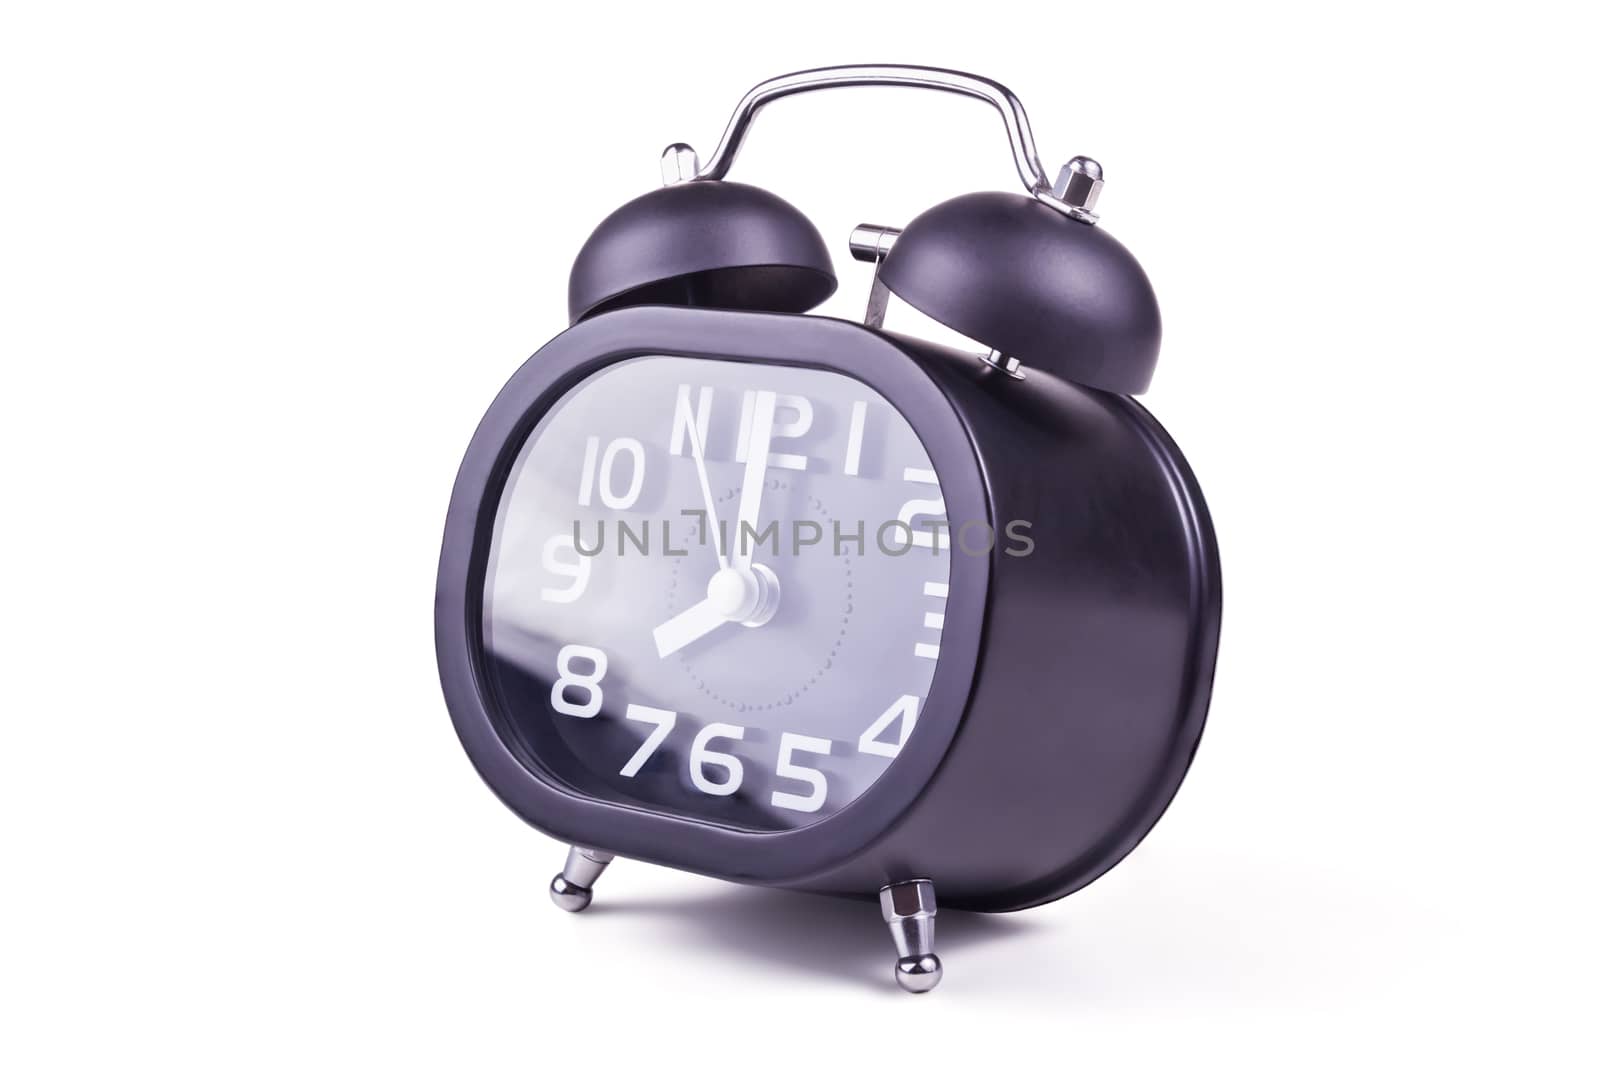 Black alarm clock with mechanical bell isolated on white background